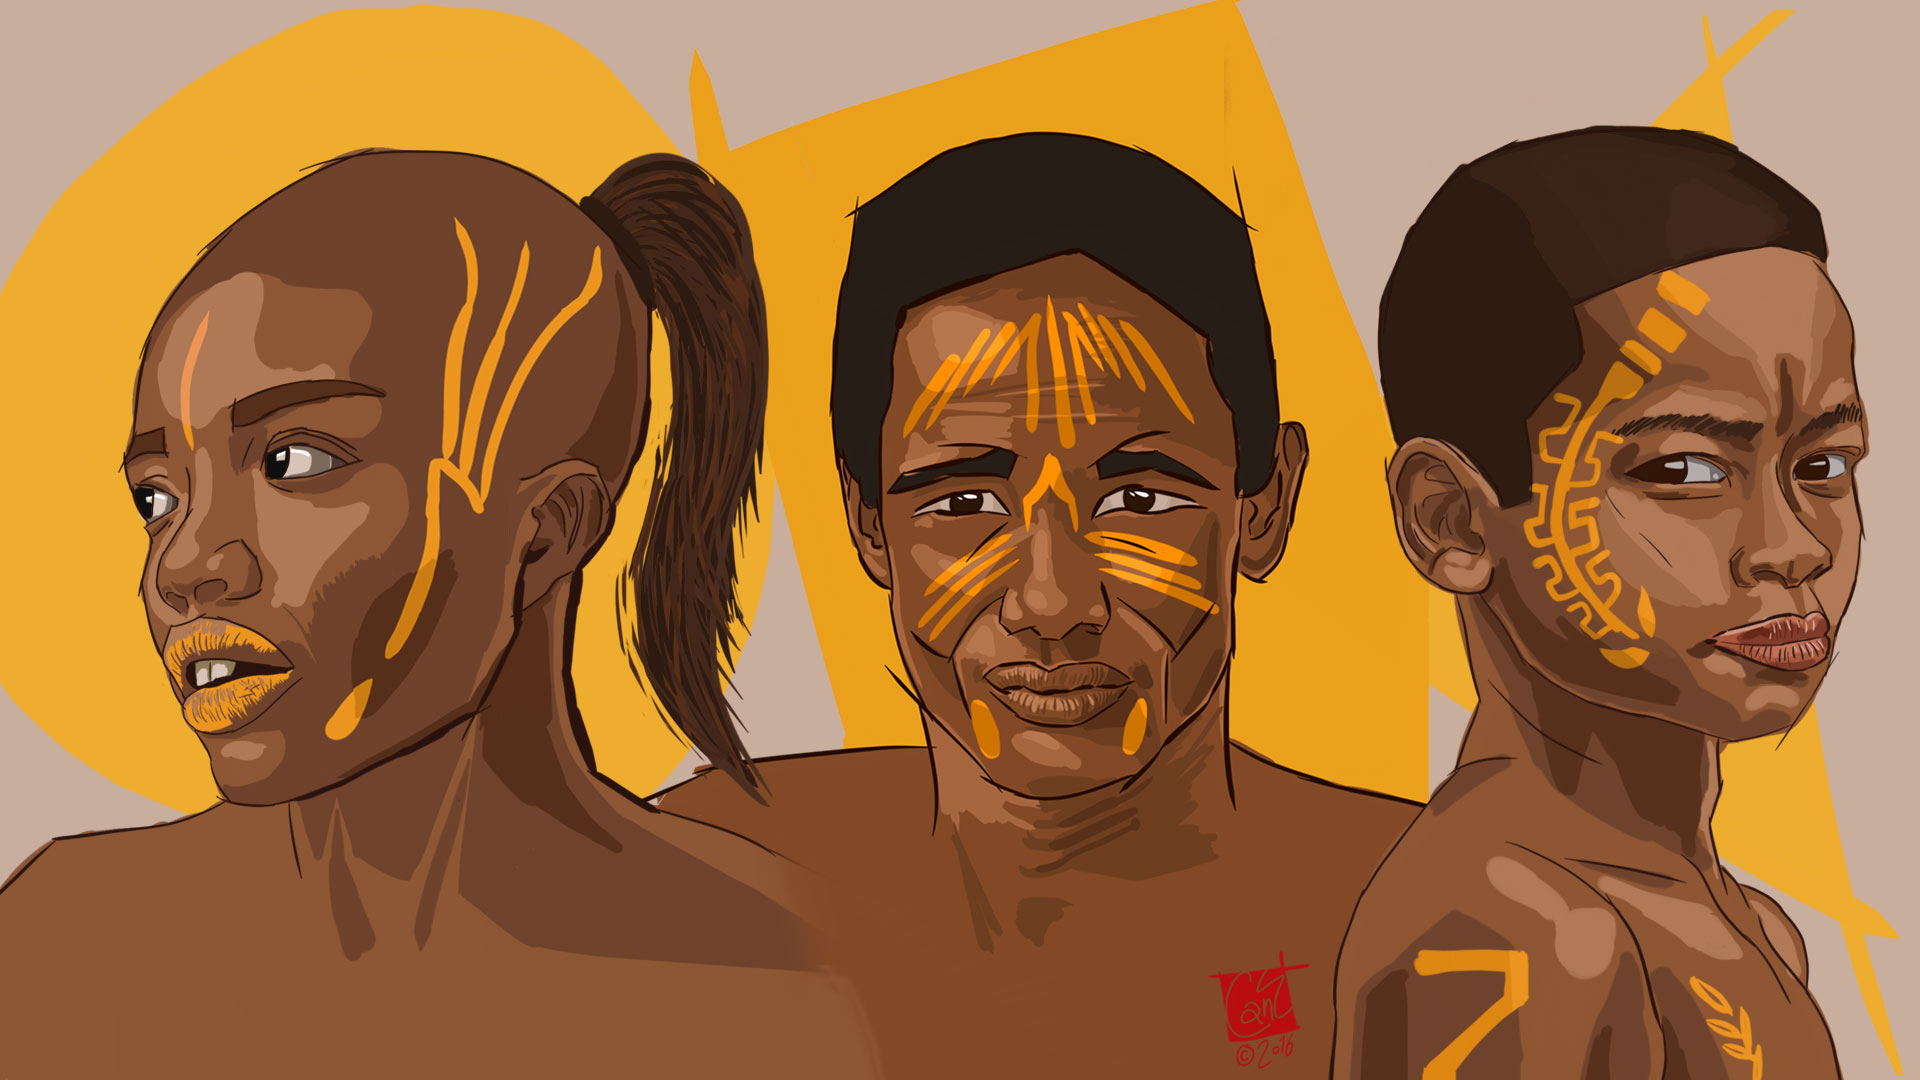 Afrikanzis character design drawings from Can Egridere wallpaper